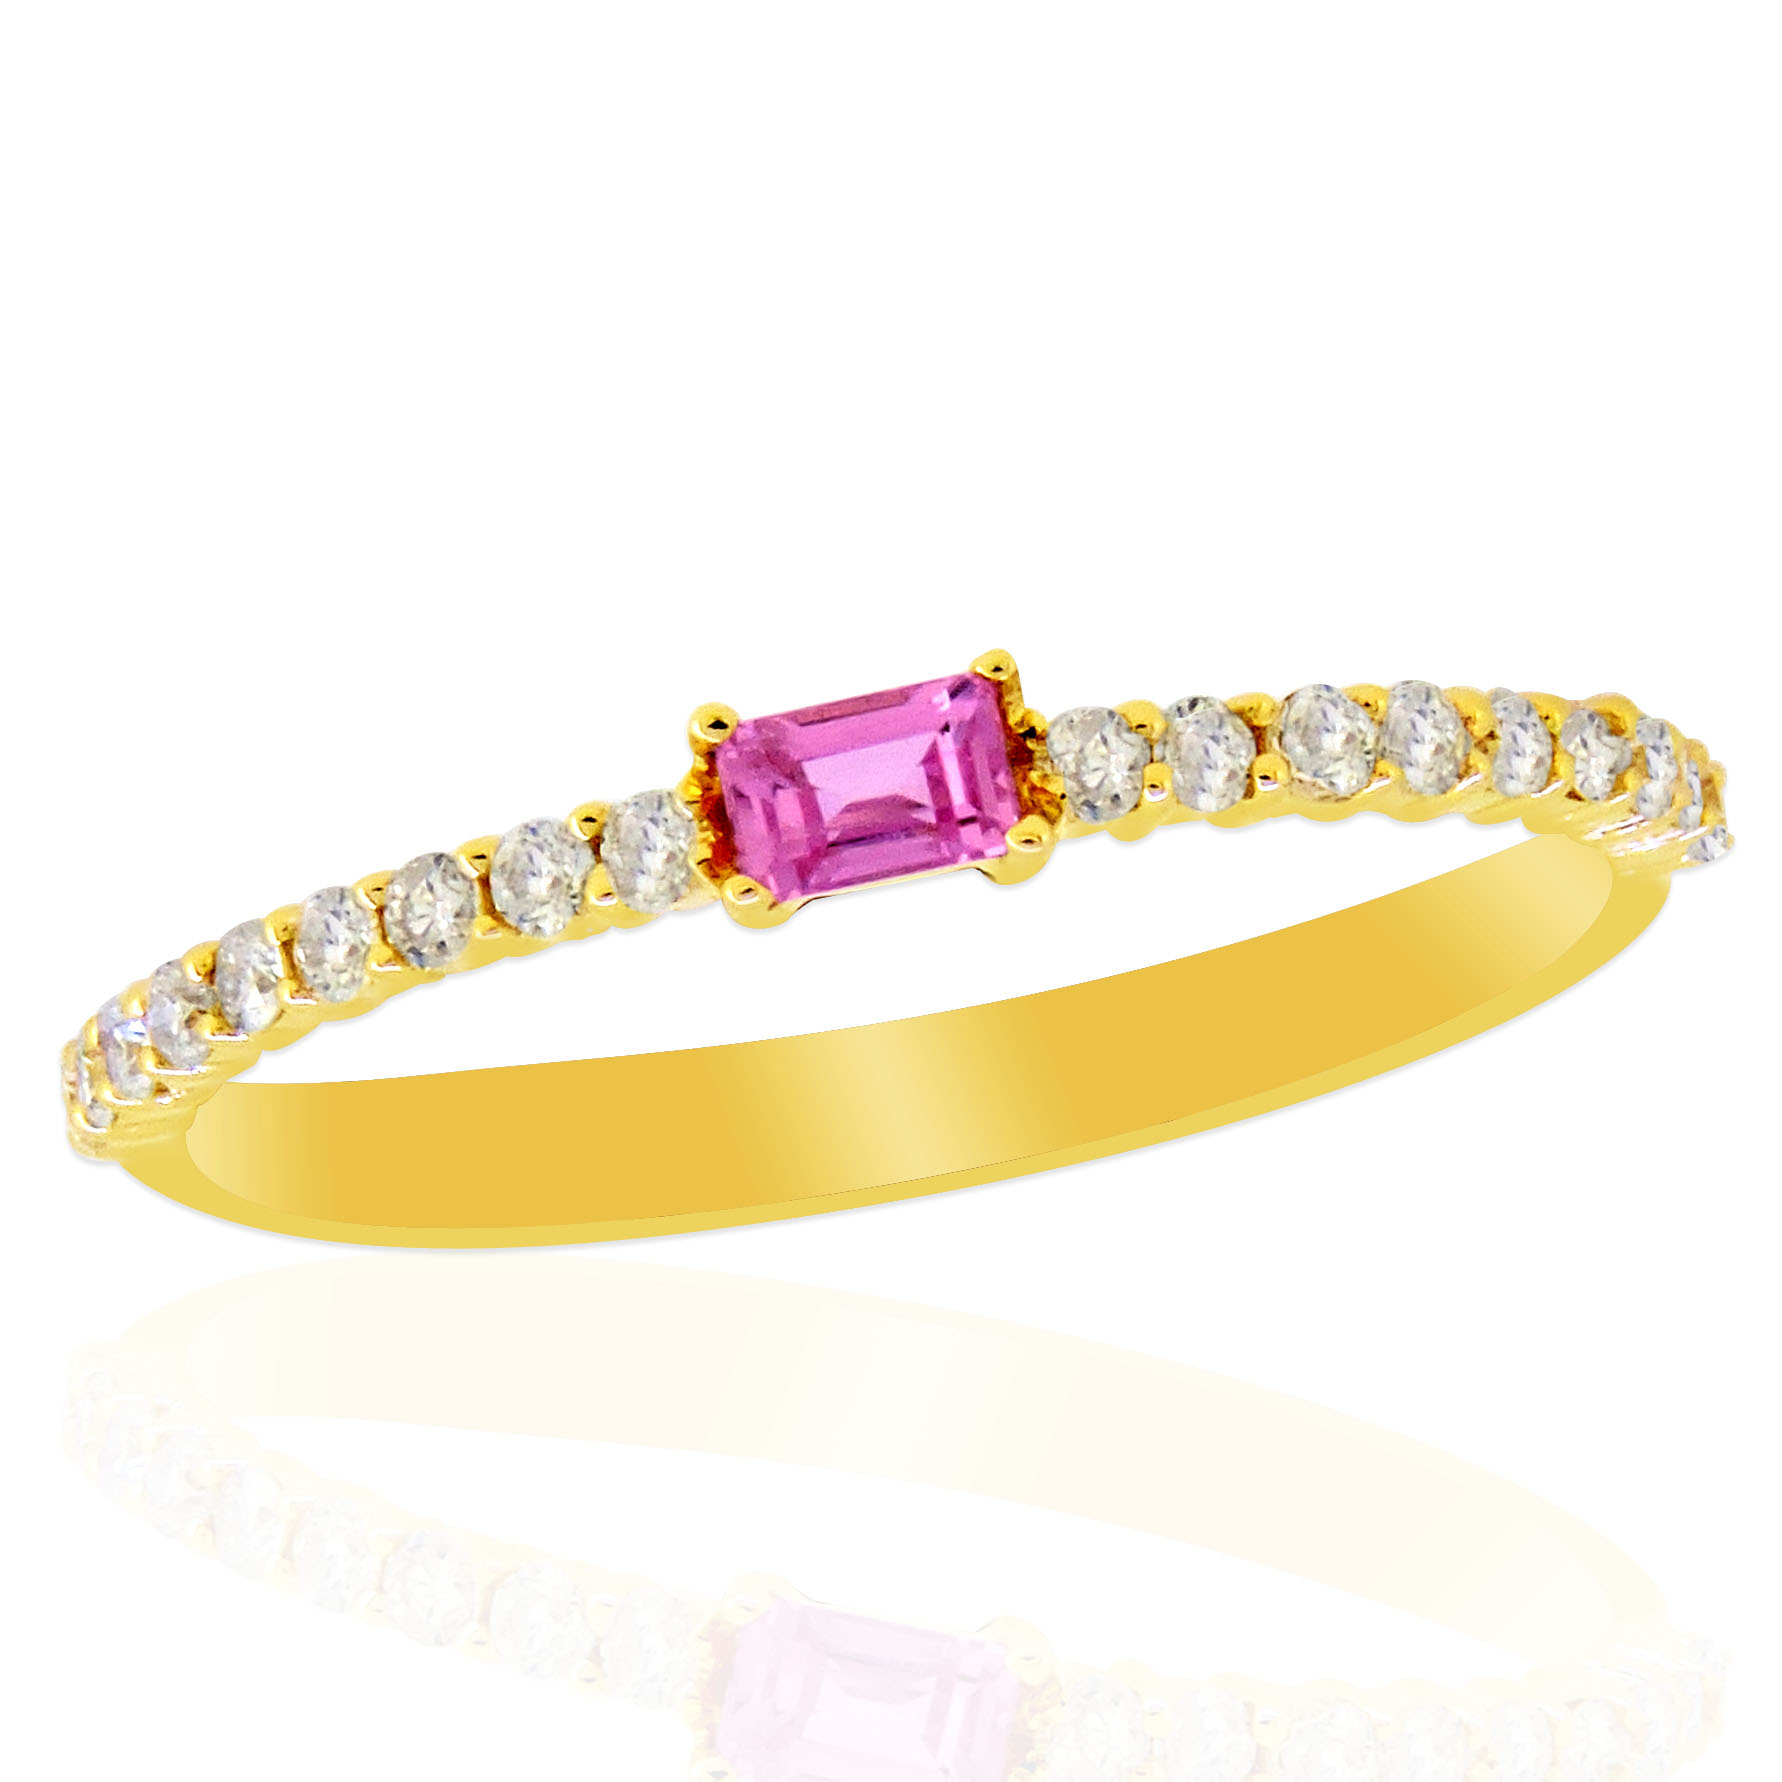 The ring contains 1 baguette cut pink sapphire prong set in the center with 9 full cut diamonds prong set on either side of center. Pink sapphire approximately = .11ctw. 18 diamonds approximately=